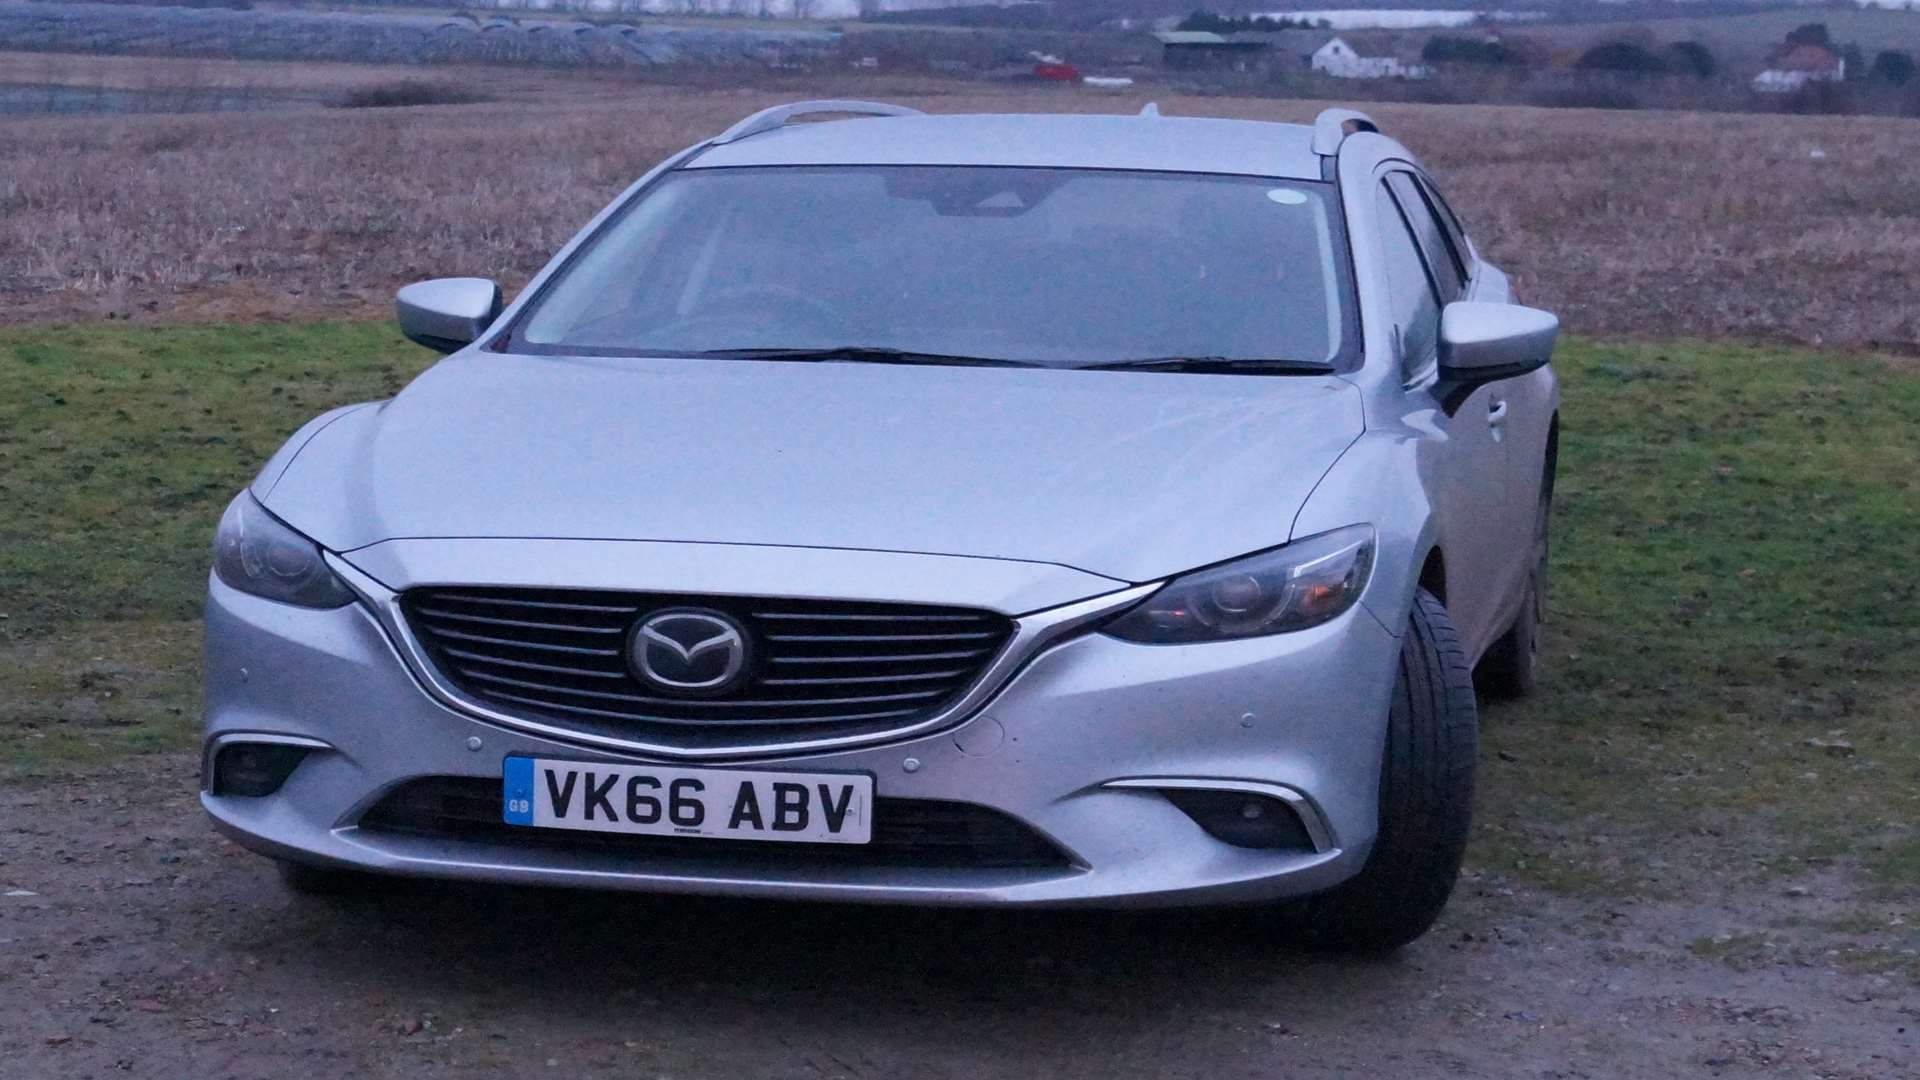 On the road the Mazda6 feels brisk